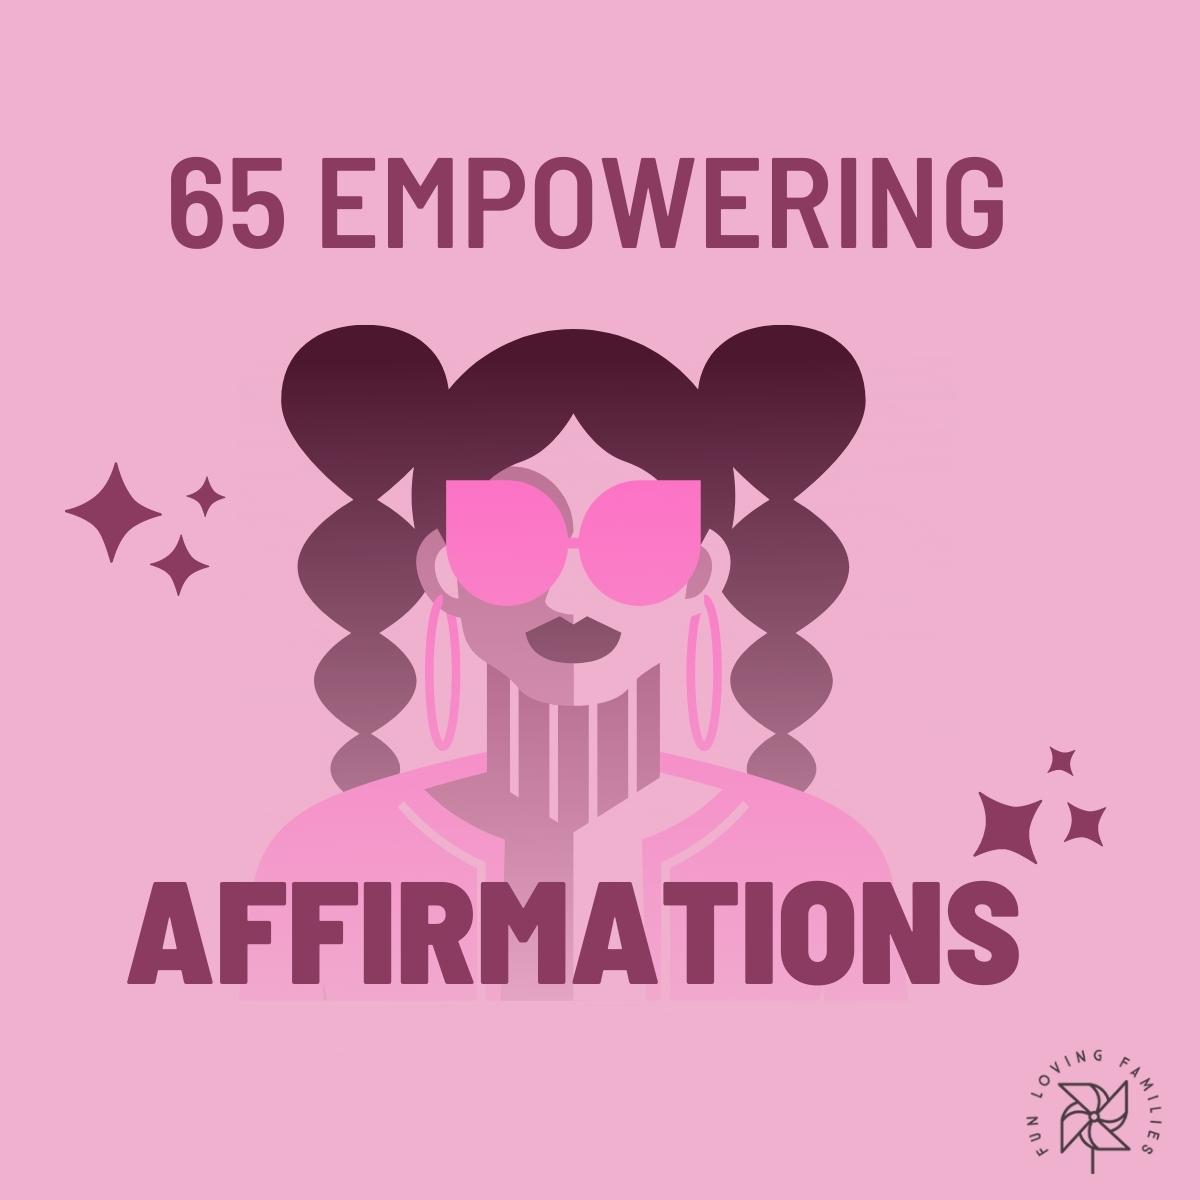 65 empowering affirmations